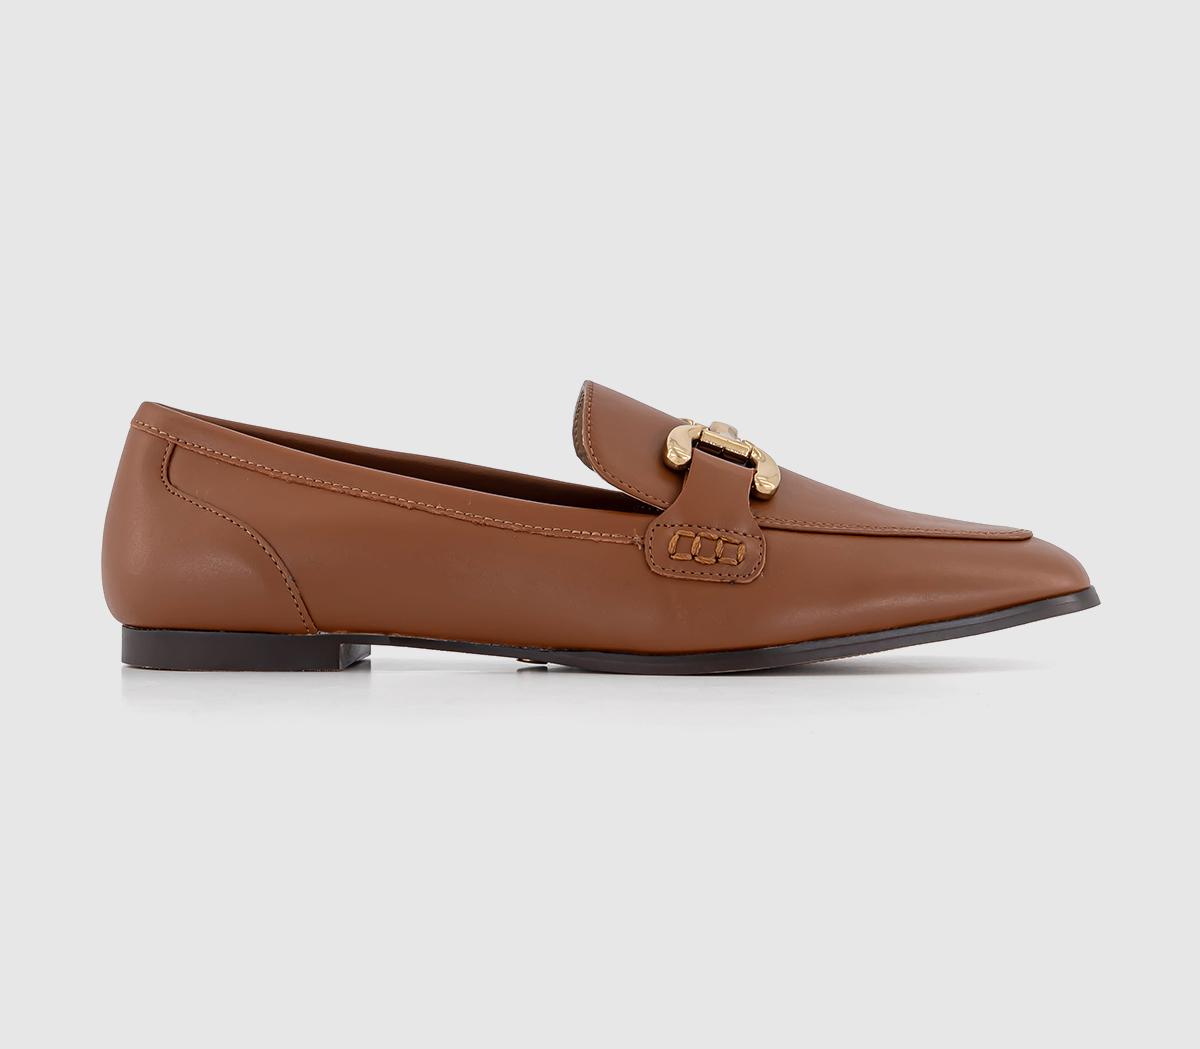 OFFICEFarland Leather Trim LoafersTan Leather